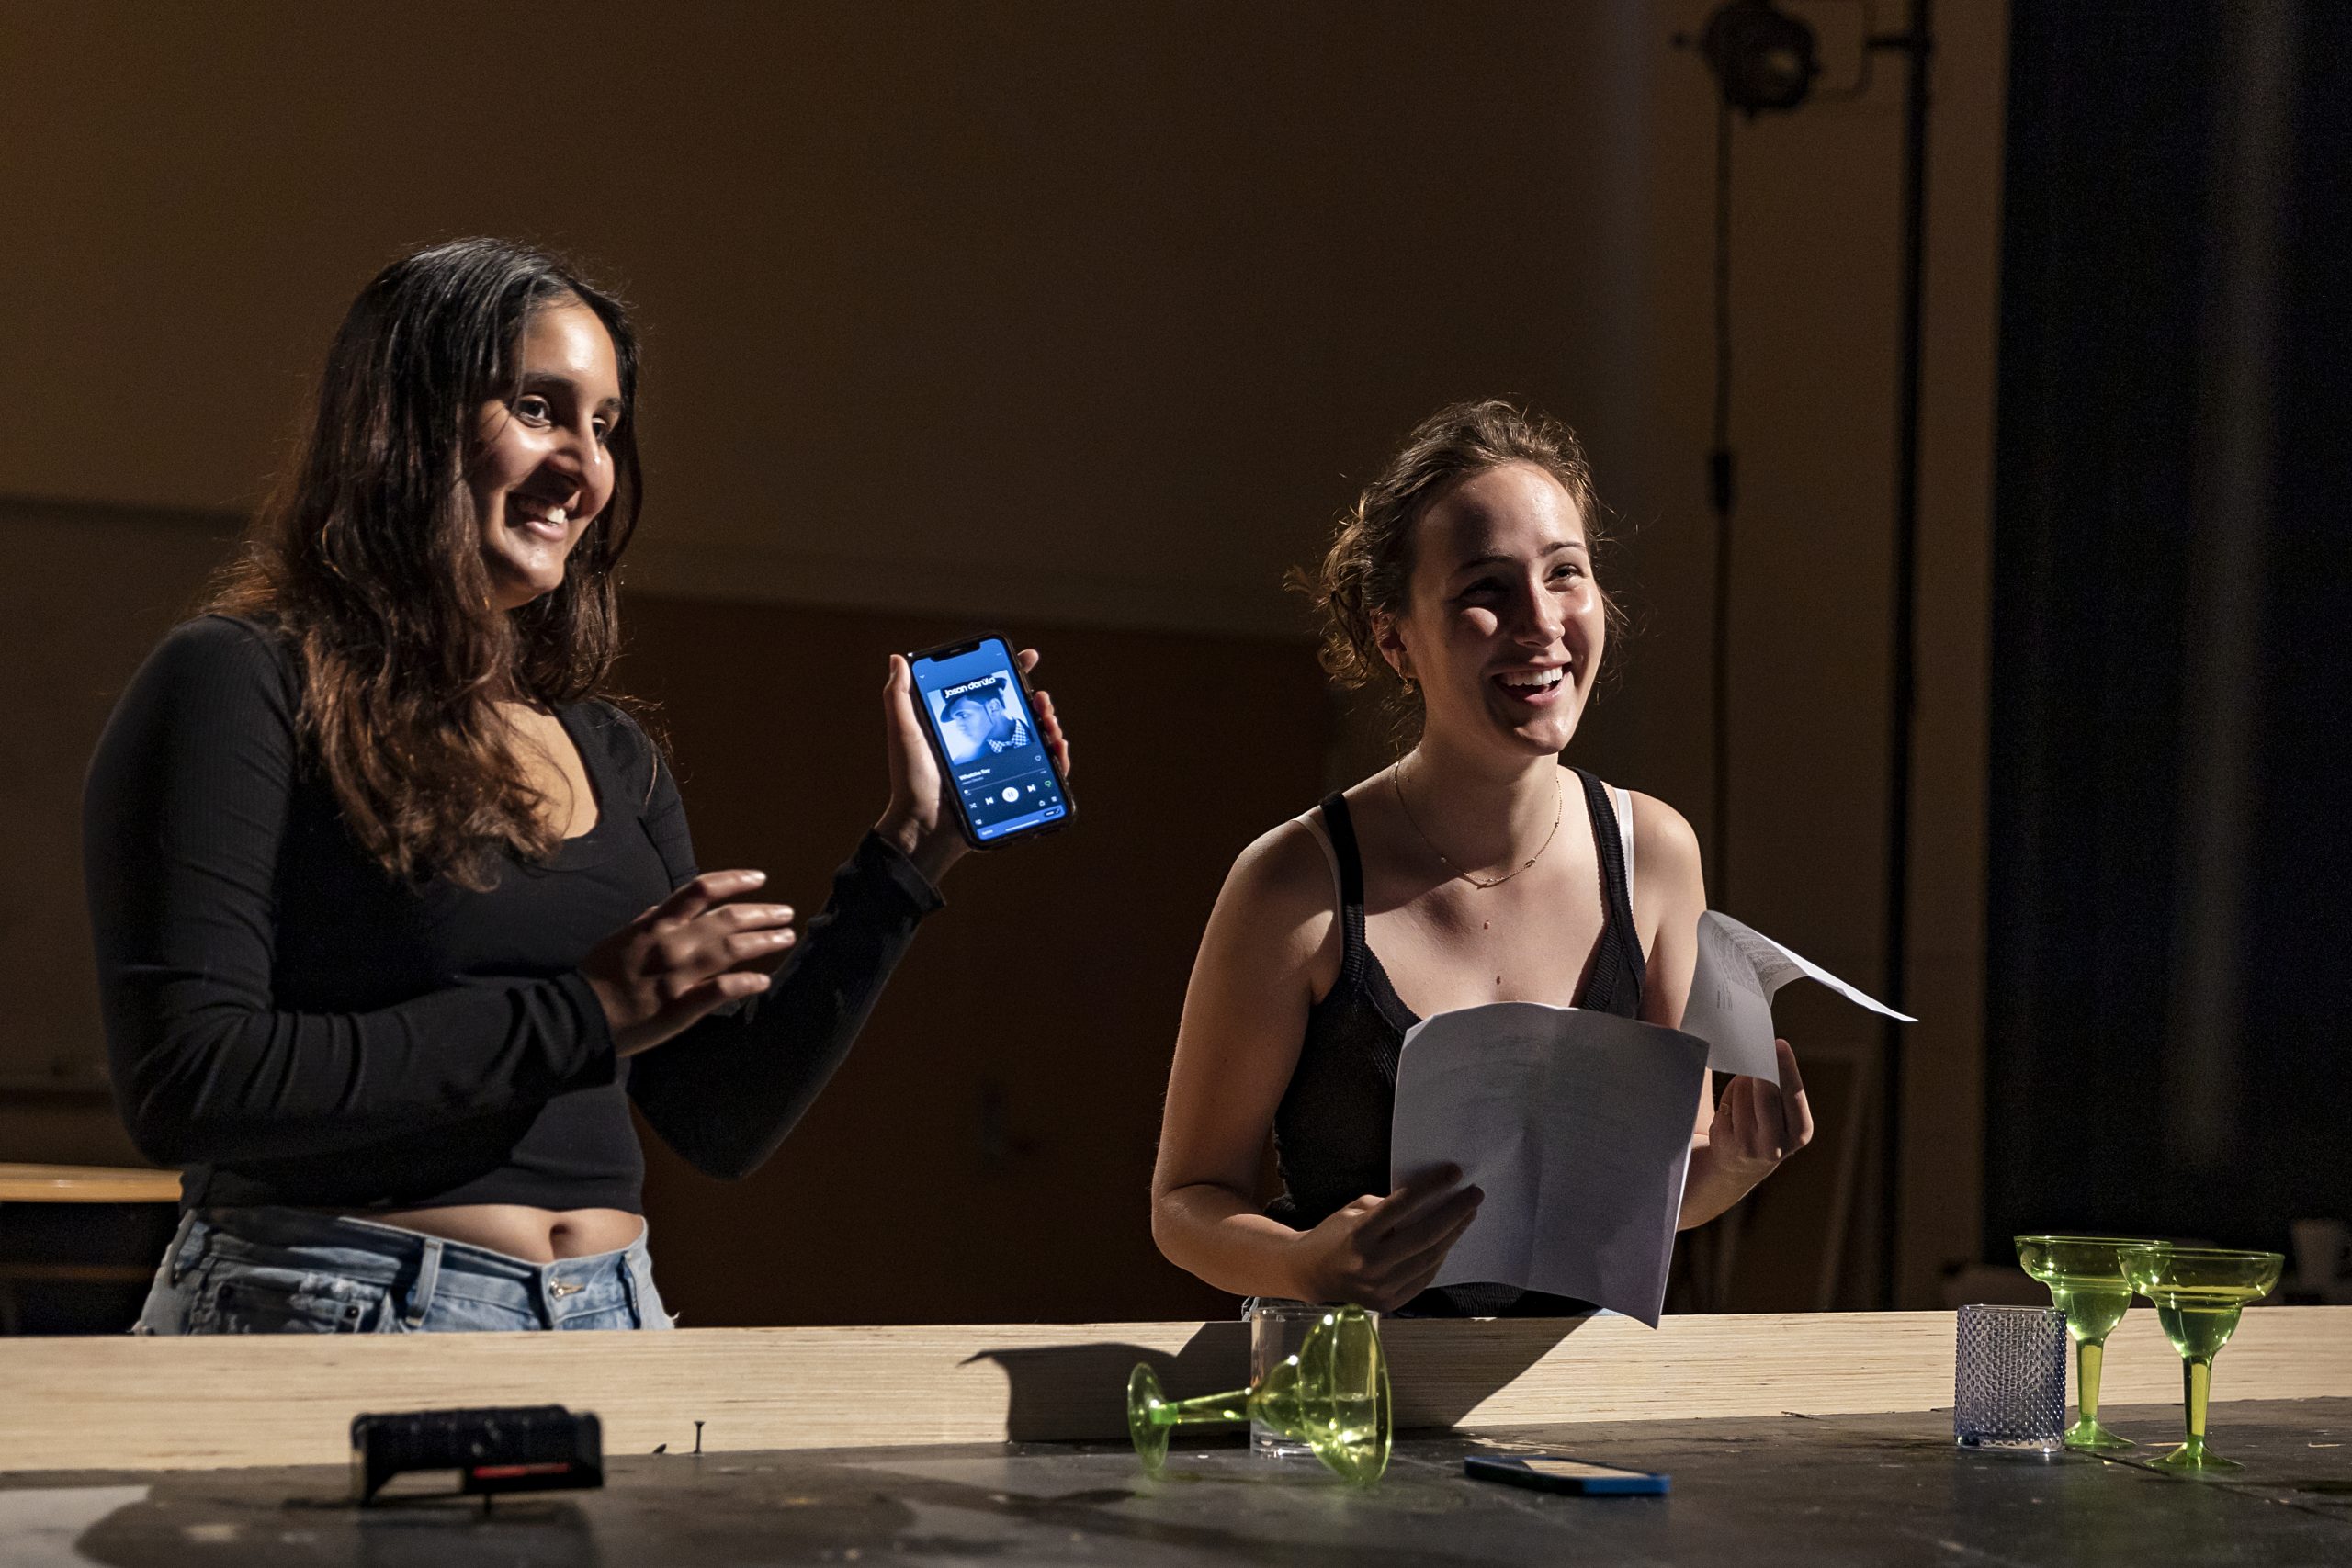 Students participate in a Maymester drama course that focused on writing half-hour comedies for television on May 25, 2022, at the Gillings Center for Dramatic Art on the campus of the University of North Carolina at Chapel Hill. In this image, (from left) junior Tara Ghorpadkar and sophomore Marion Dewey joke around after filming a scene. Ghorpadkar was the director and Dewey was the writer for the scene. (Johnny Andrews/UNC-Chapel Hill)